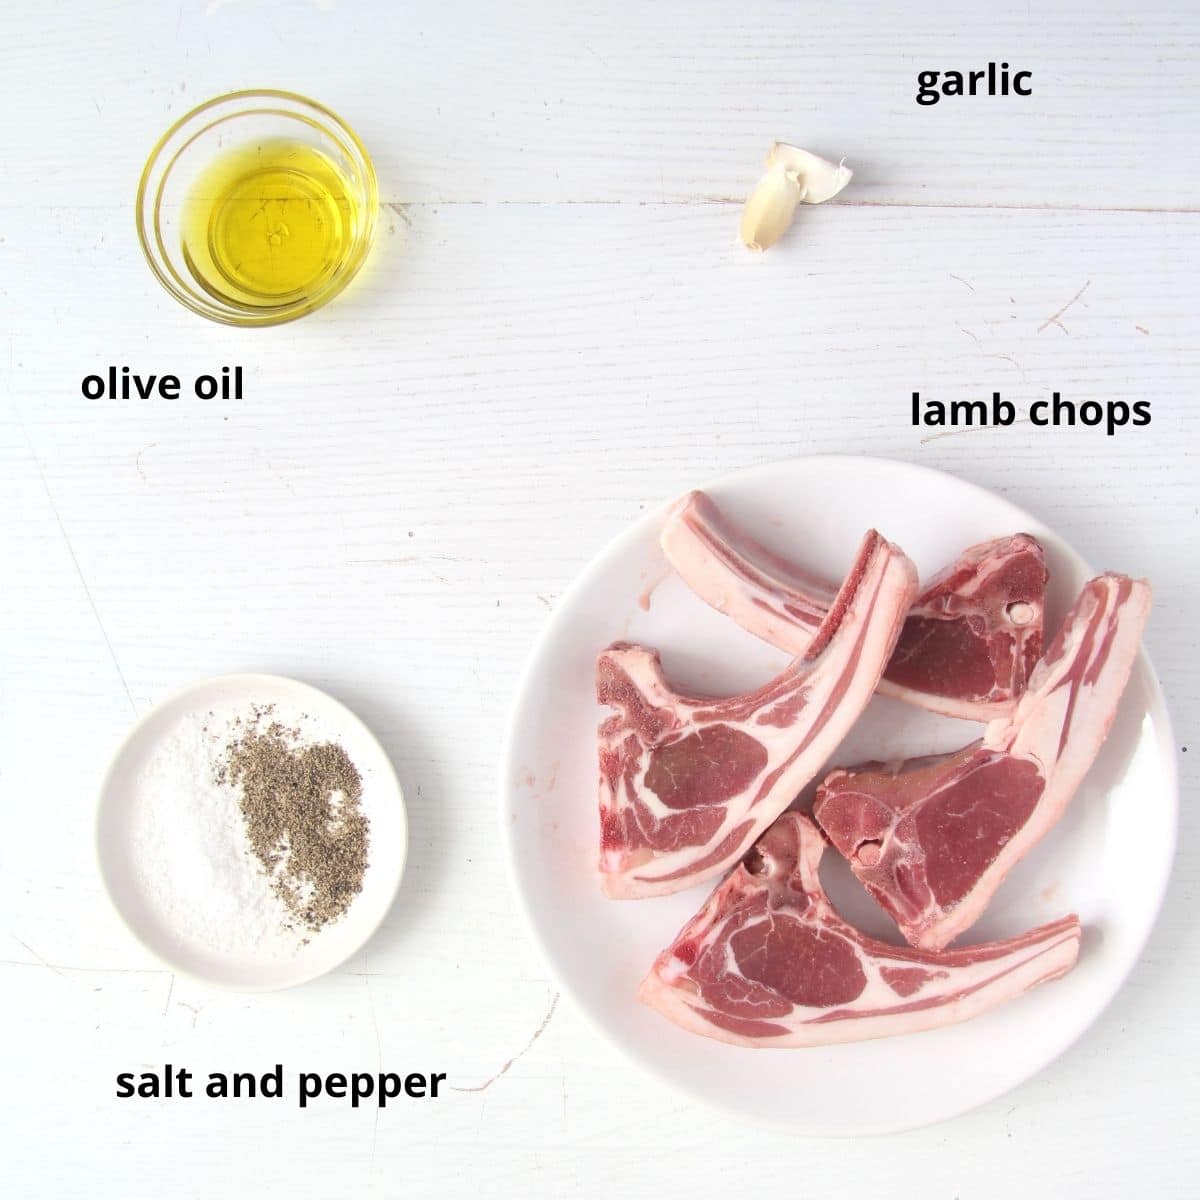 raw lamb chops on a plate, garlic cloves and bowls with oil and spices.